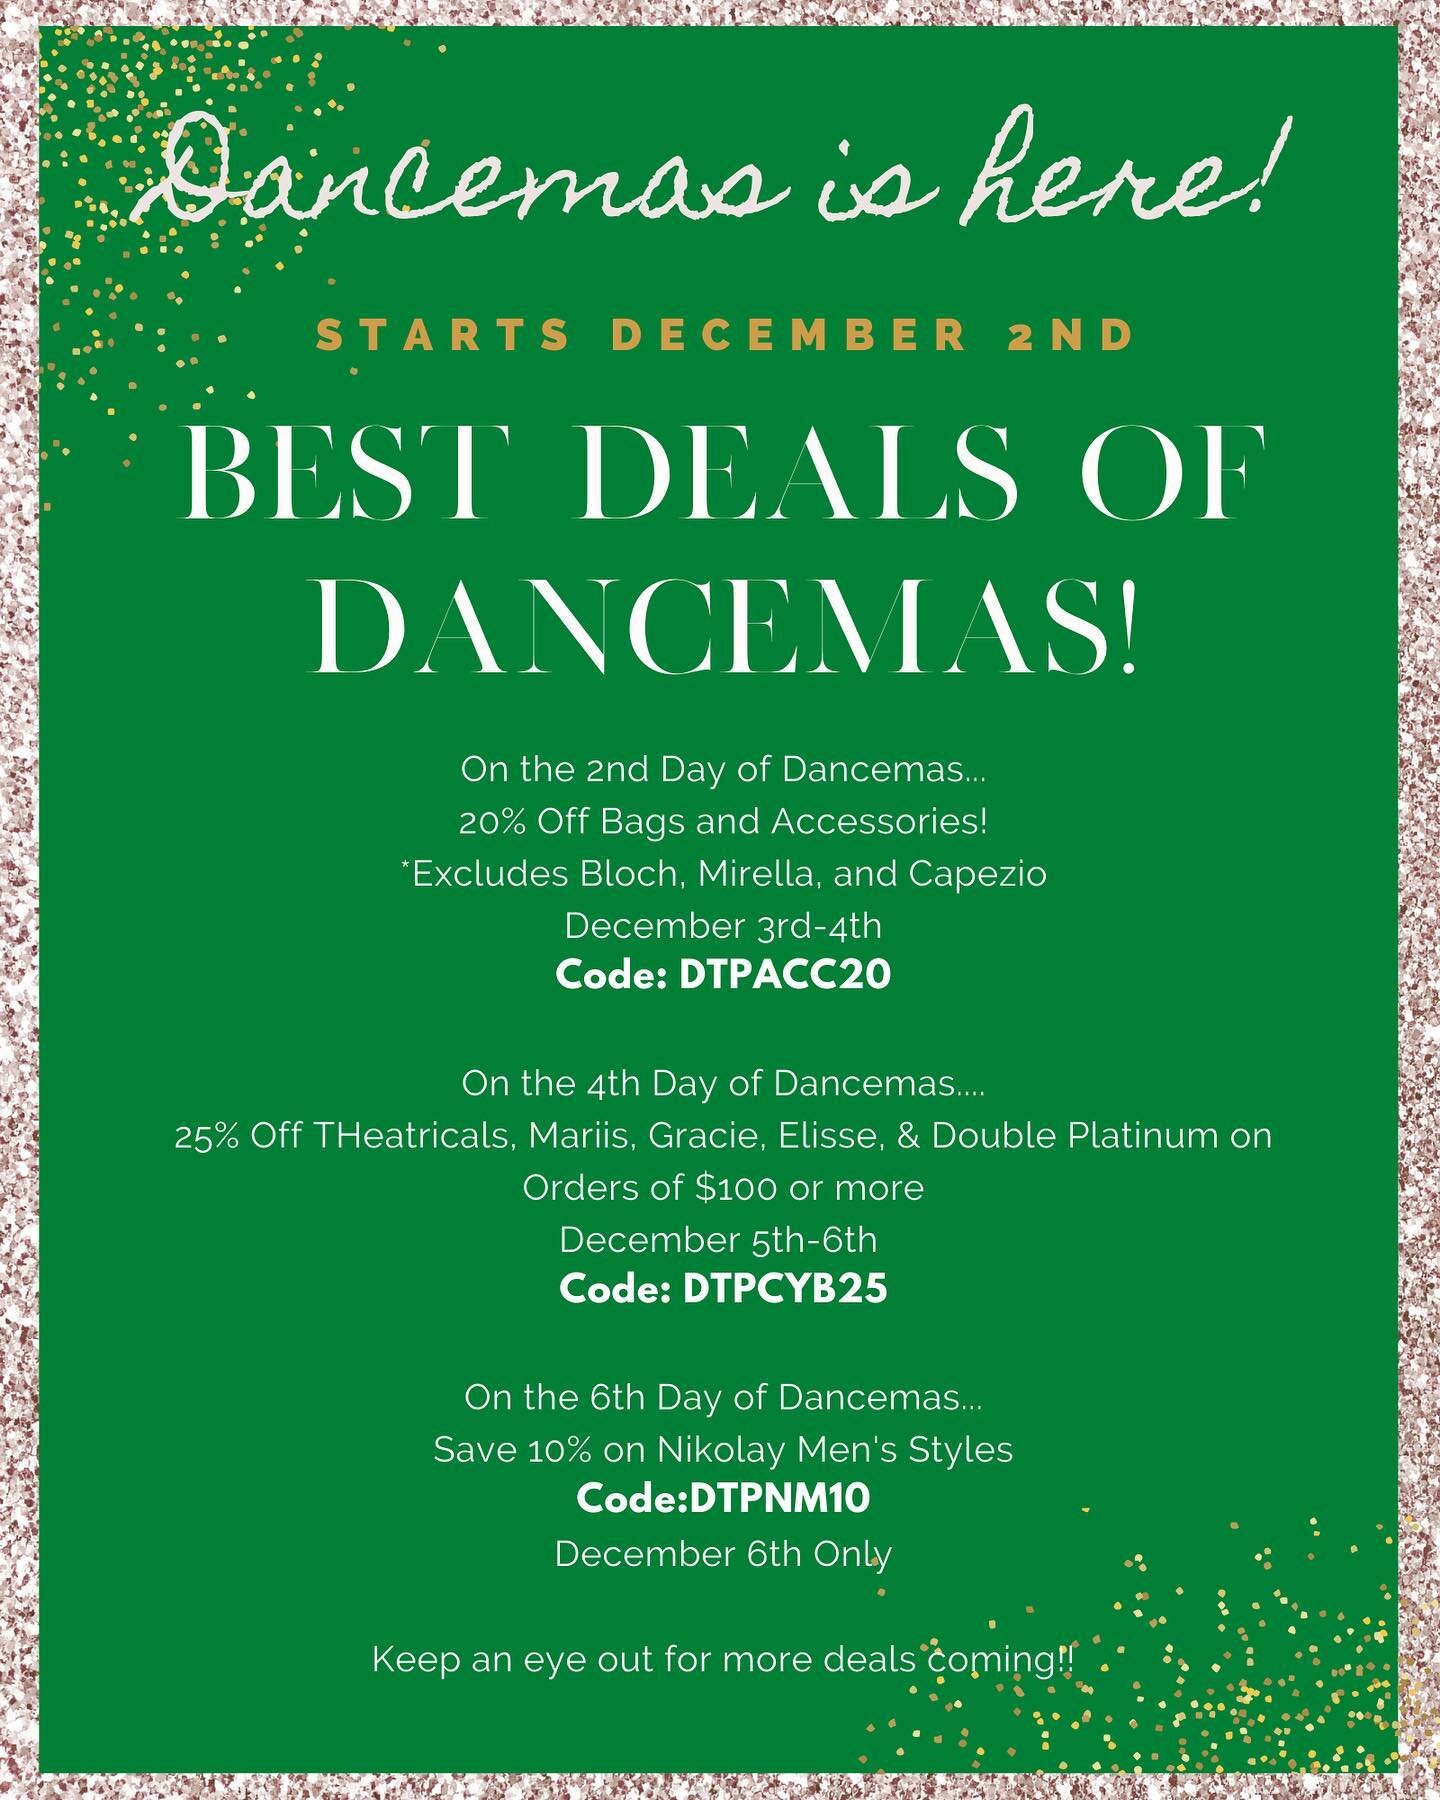 Anyone needing dance attire or Christmas gifts for your dancers, check out Discount Dance for their December deals. 

#dance #redlands #discountdance #love2dance #lgspa #lookingglassstudio